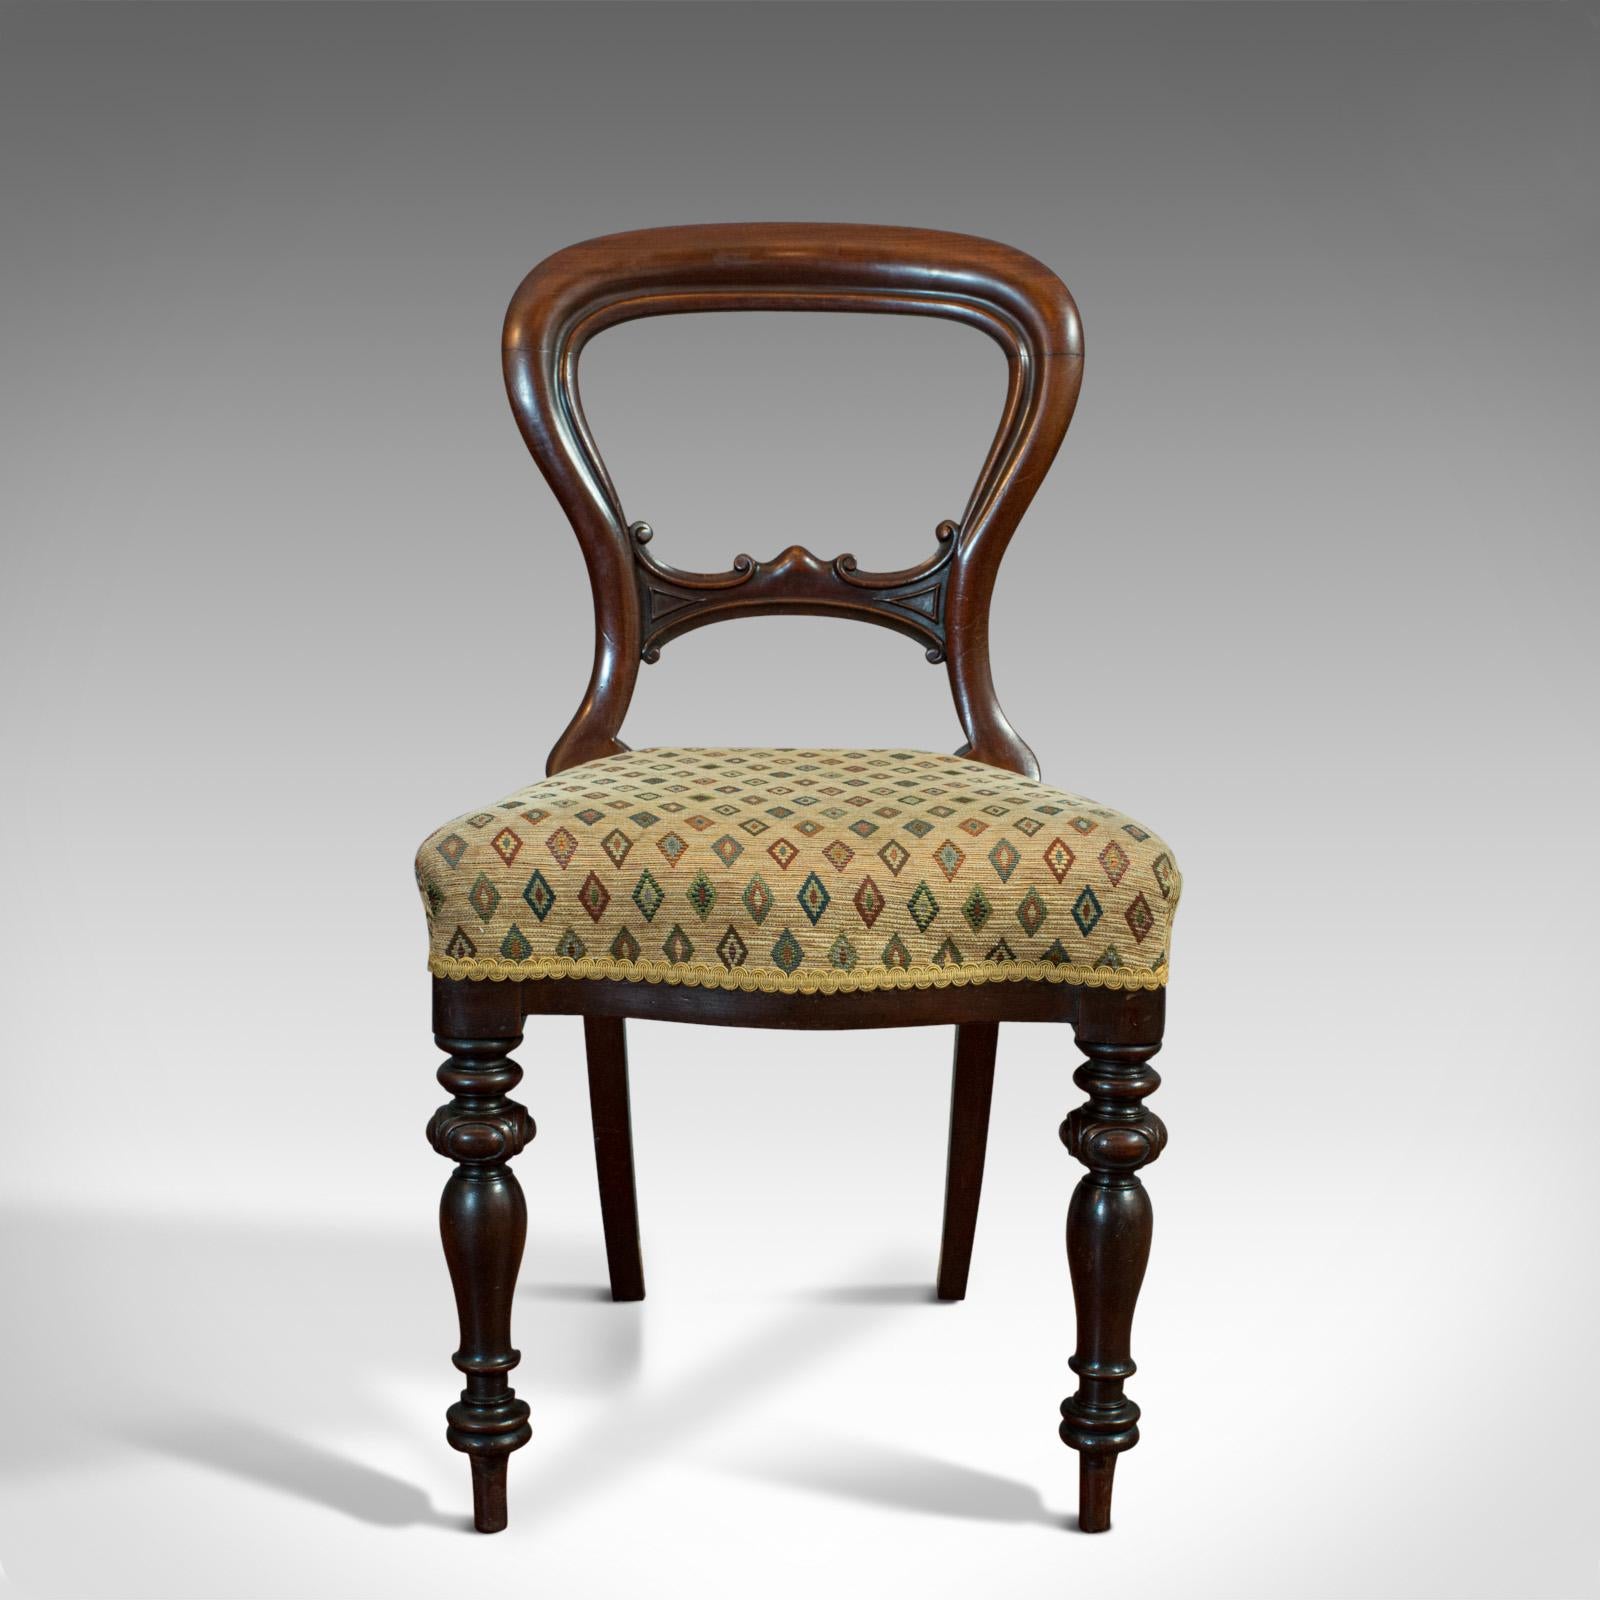 This is an antique set of 6 dining chairs. An English, walnut balloon-back dining suite with quality textile upholstery, dating to the early Victorian period, circa 1850.

Finely crafted with appealing presentation
Displaying a desirable aged